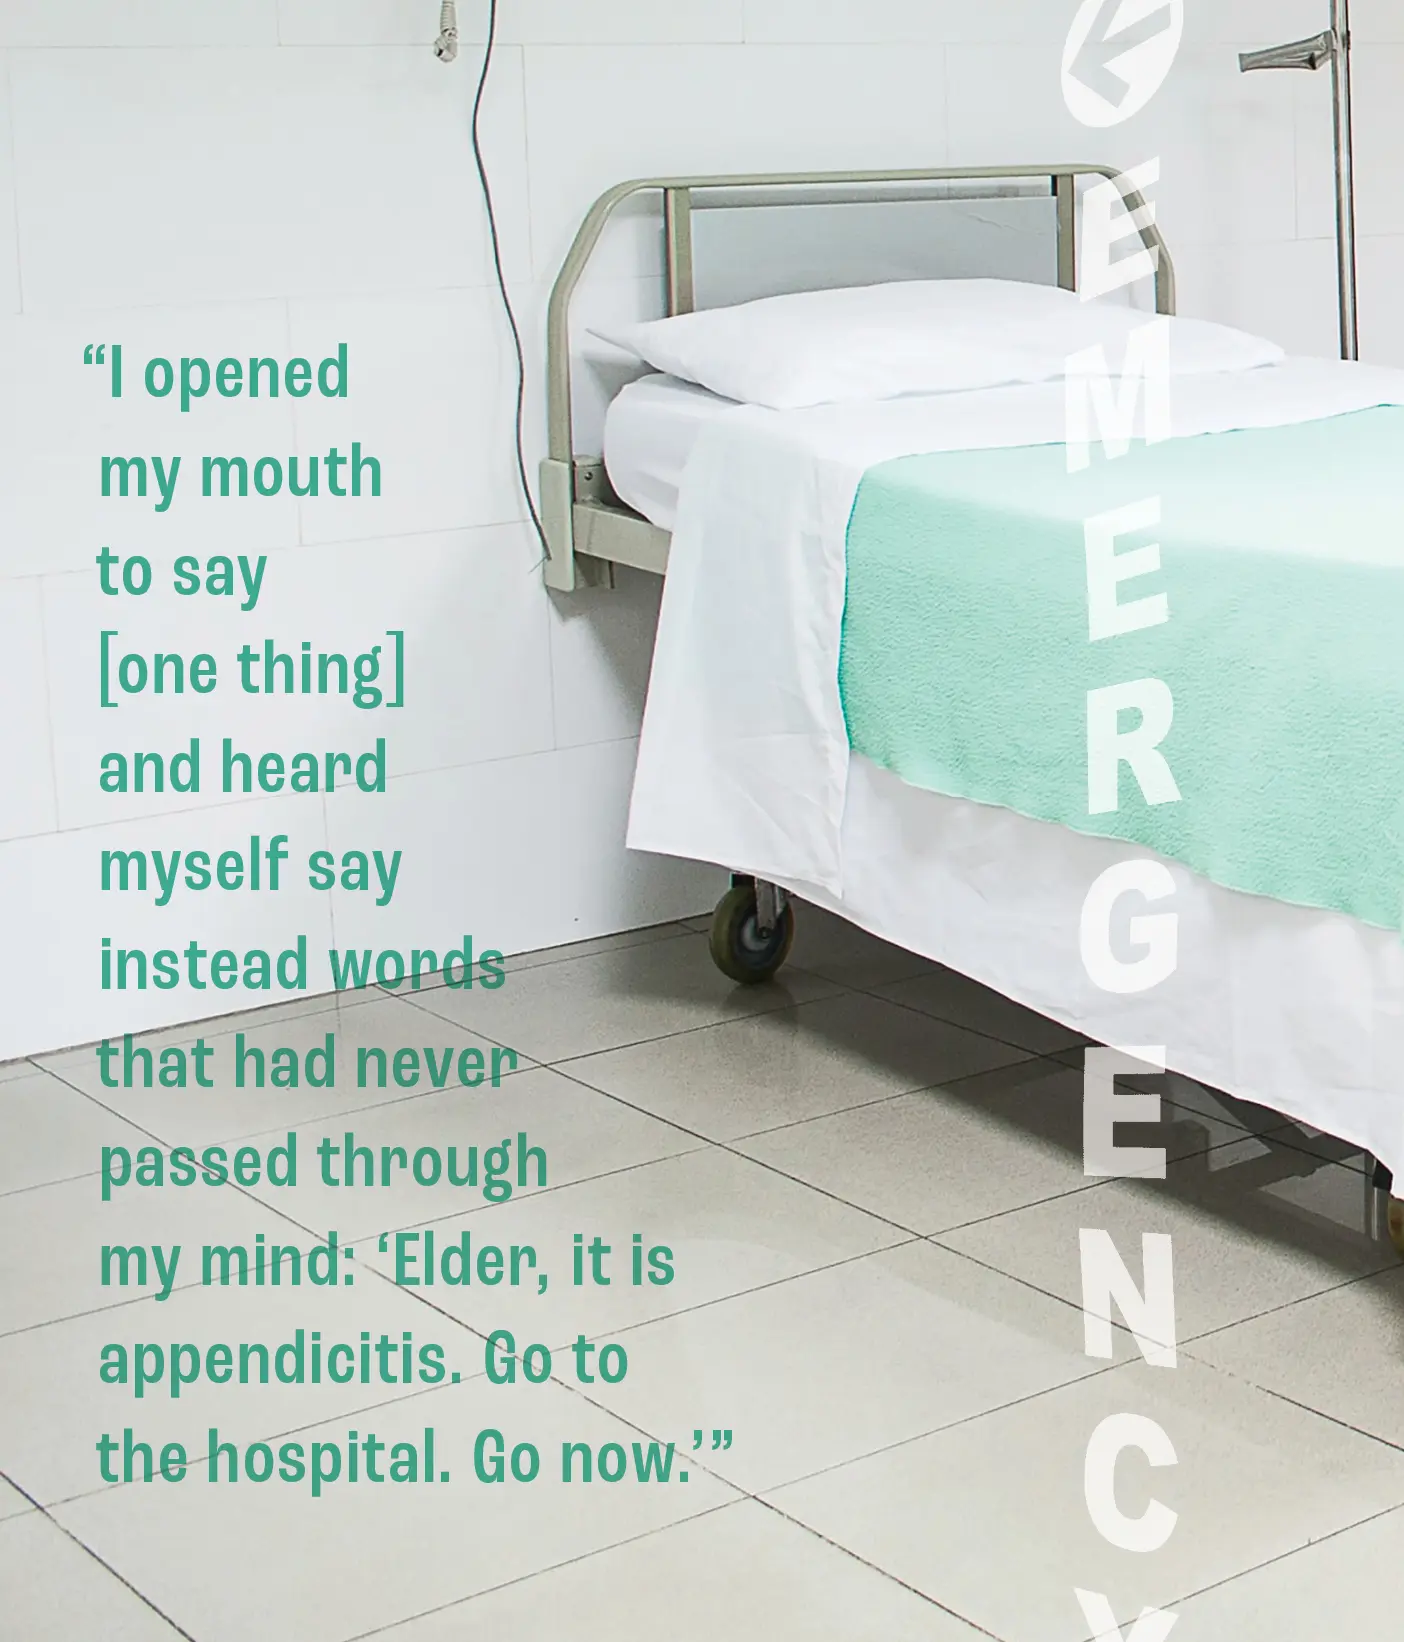 A photo of a hospital bed with a an emergency room sign printed on top. A quote overhead reads, "I opened my mouth to say [one thing] and heard myself say instead words that had never passed through my mind: 'Elder, it is appendicitis. Go to the hospital. Go now.'"